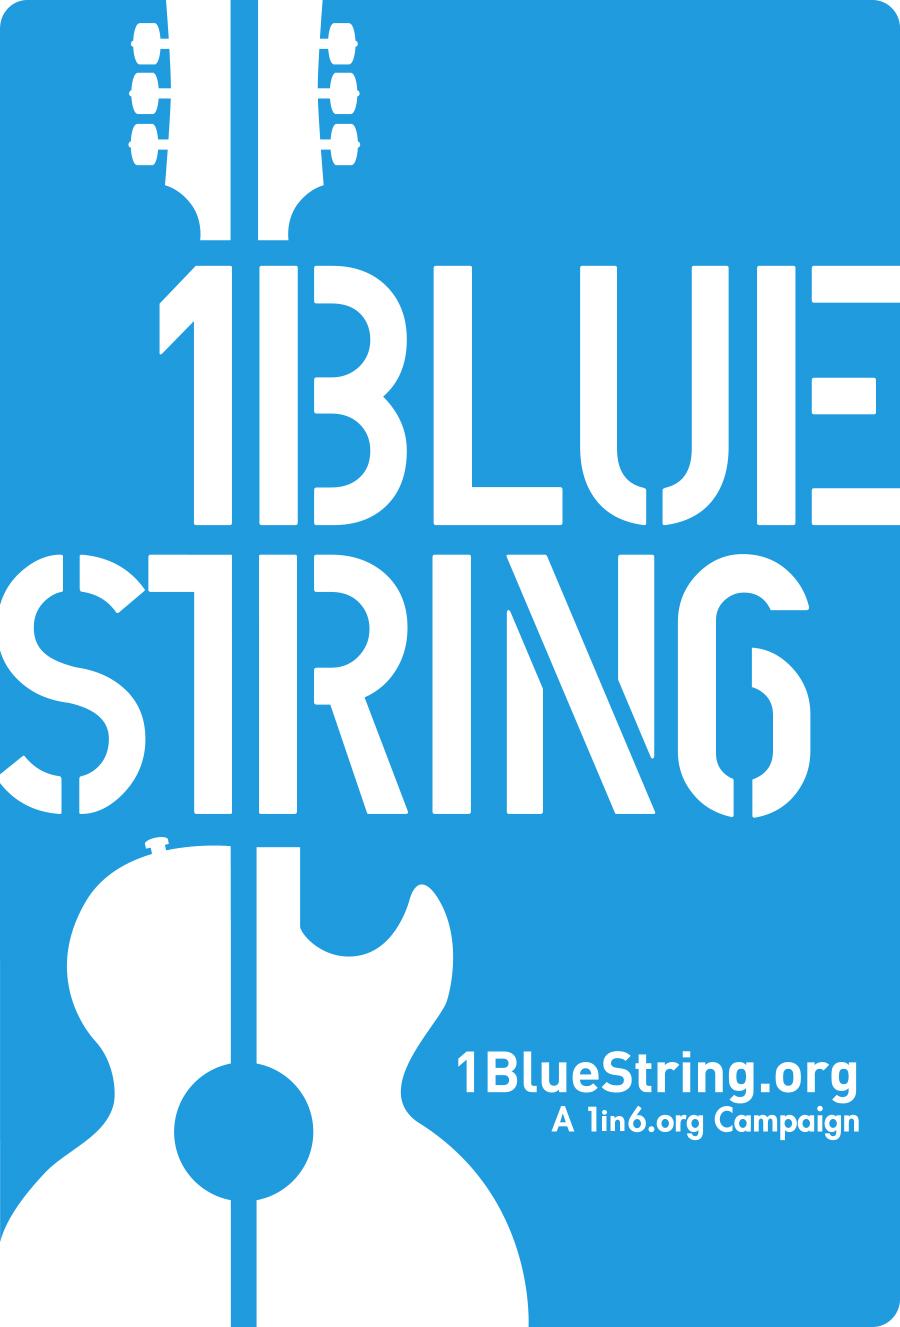 1BlueString is a campaign from Male Survivors Partnership